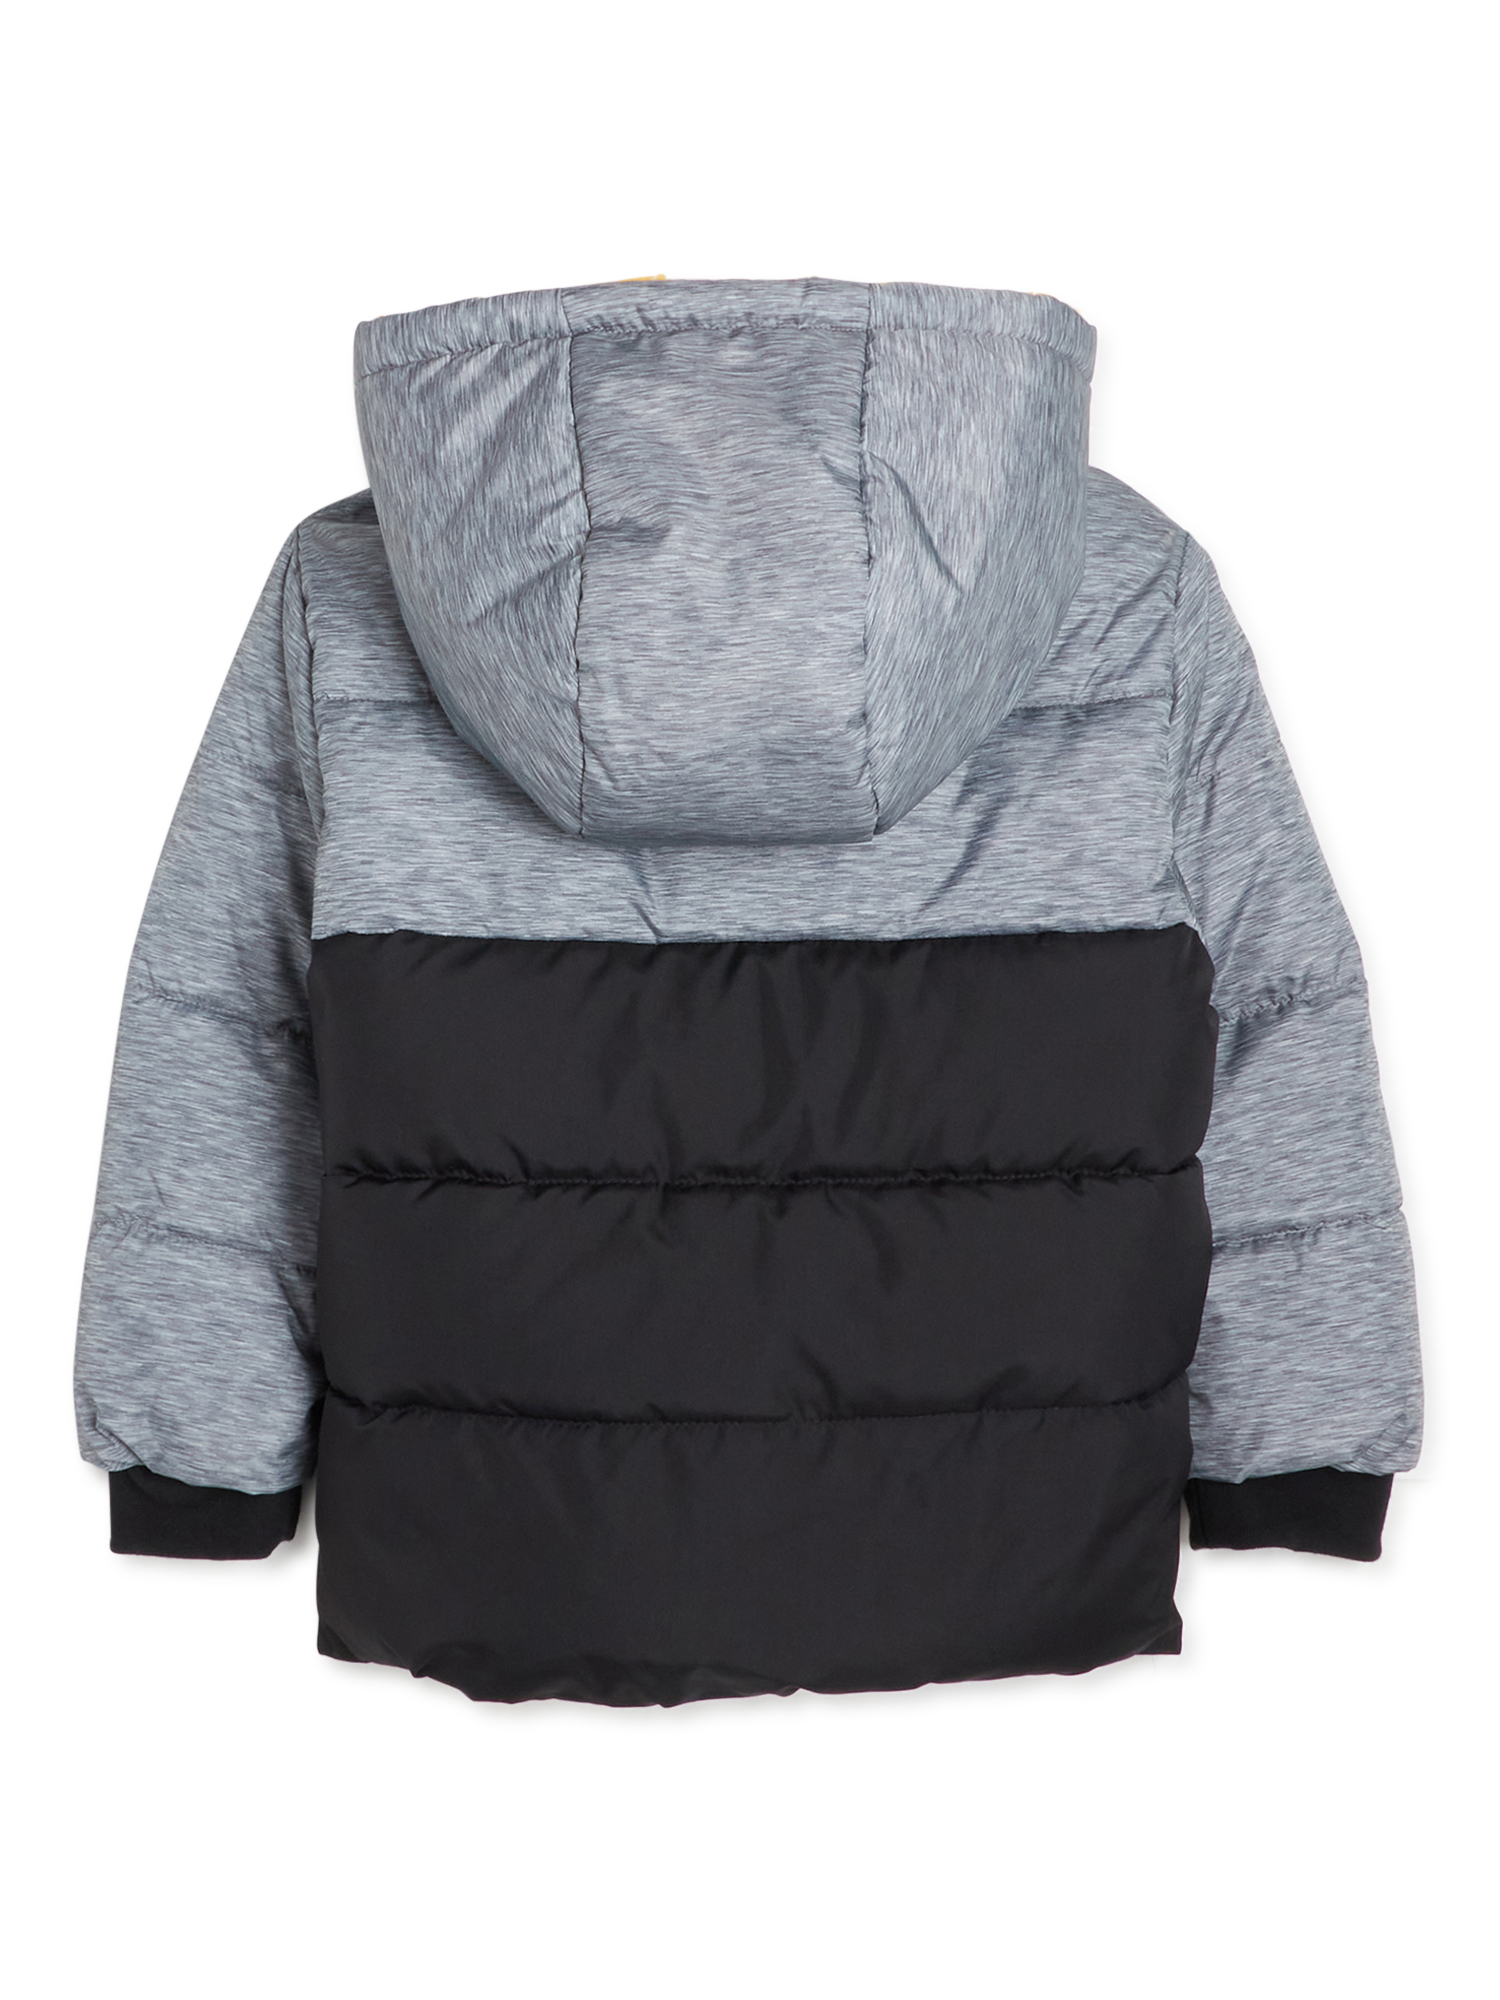 Swiss Tech Baby and Toddler Boy Puffer Jacket, Sizes 12M-5T - image 2 of 3